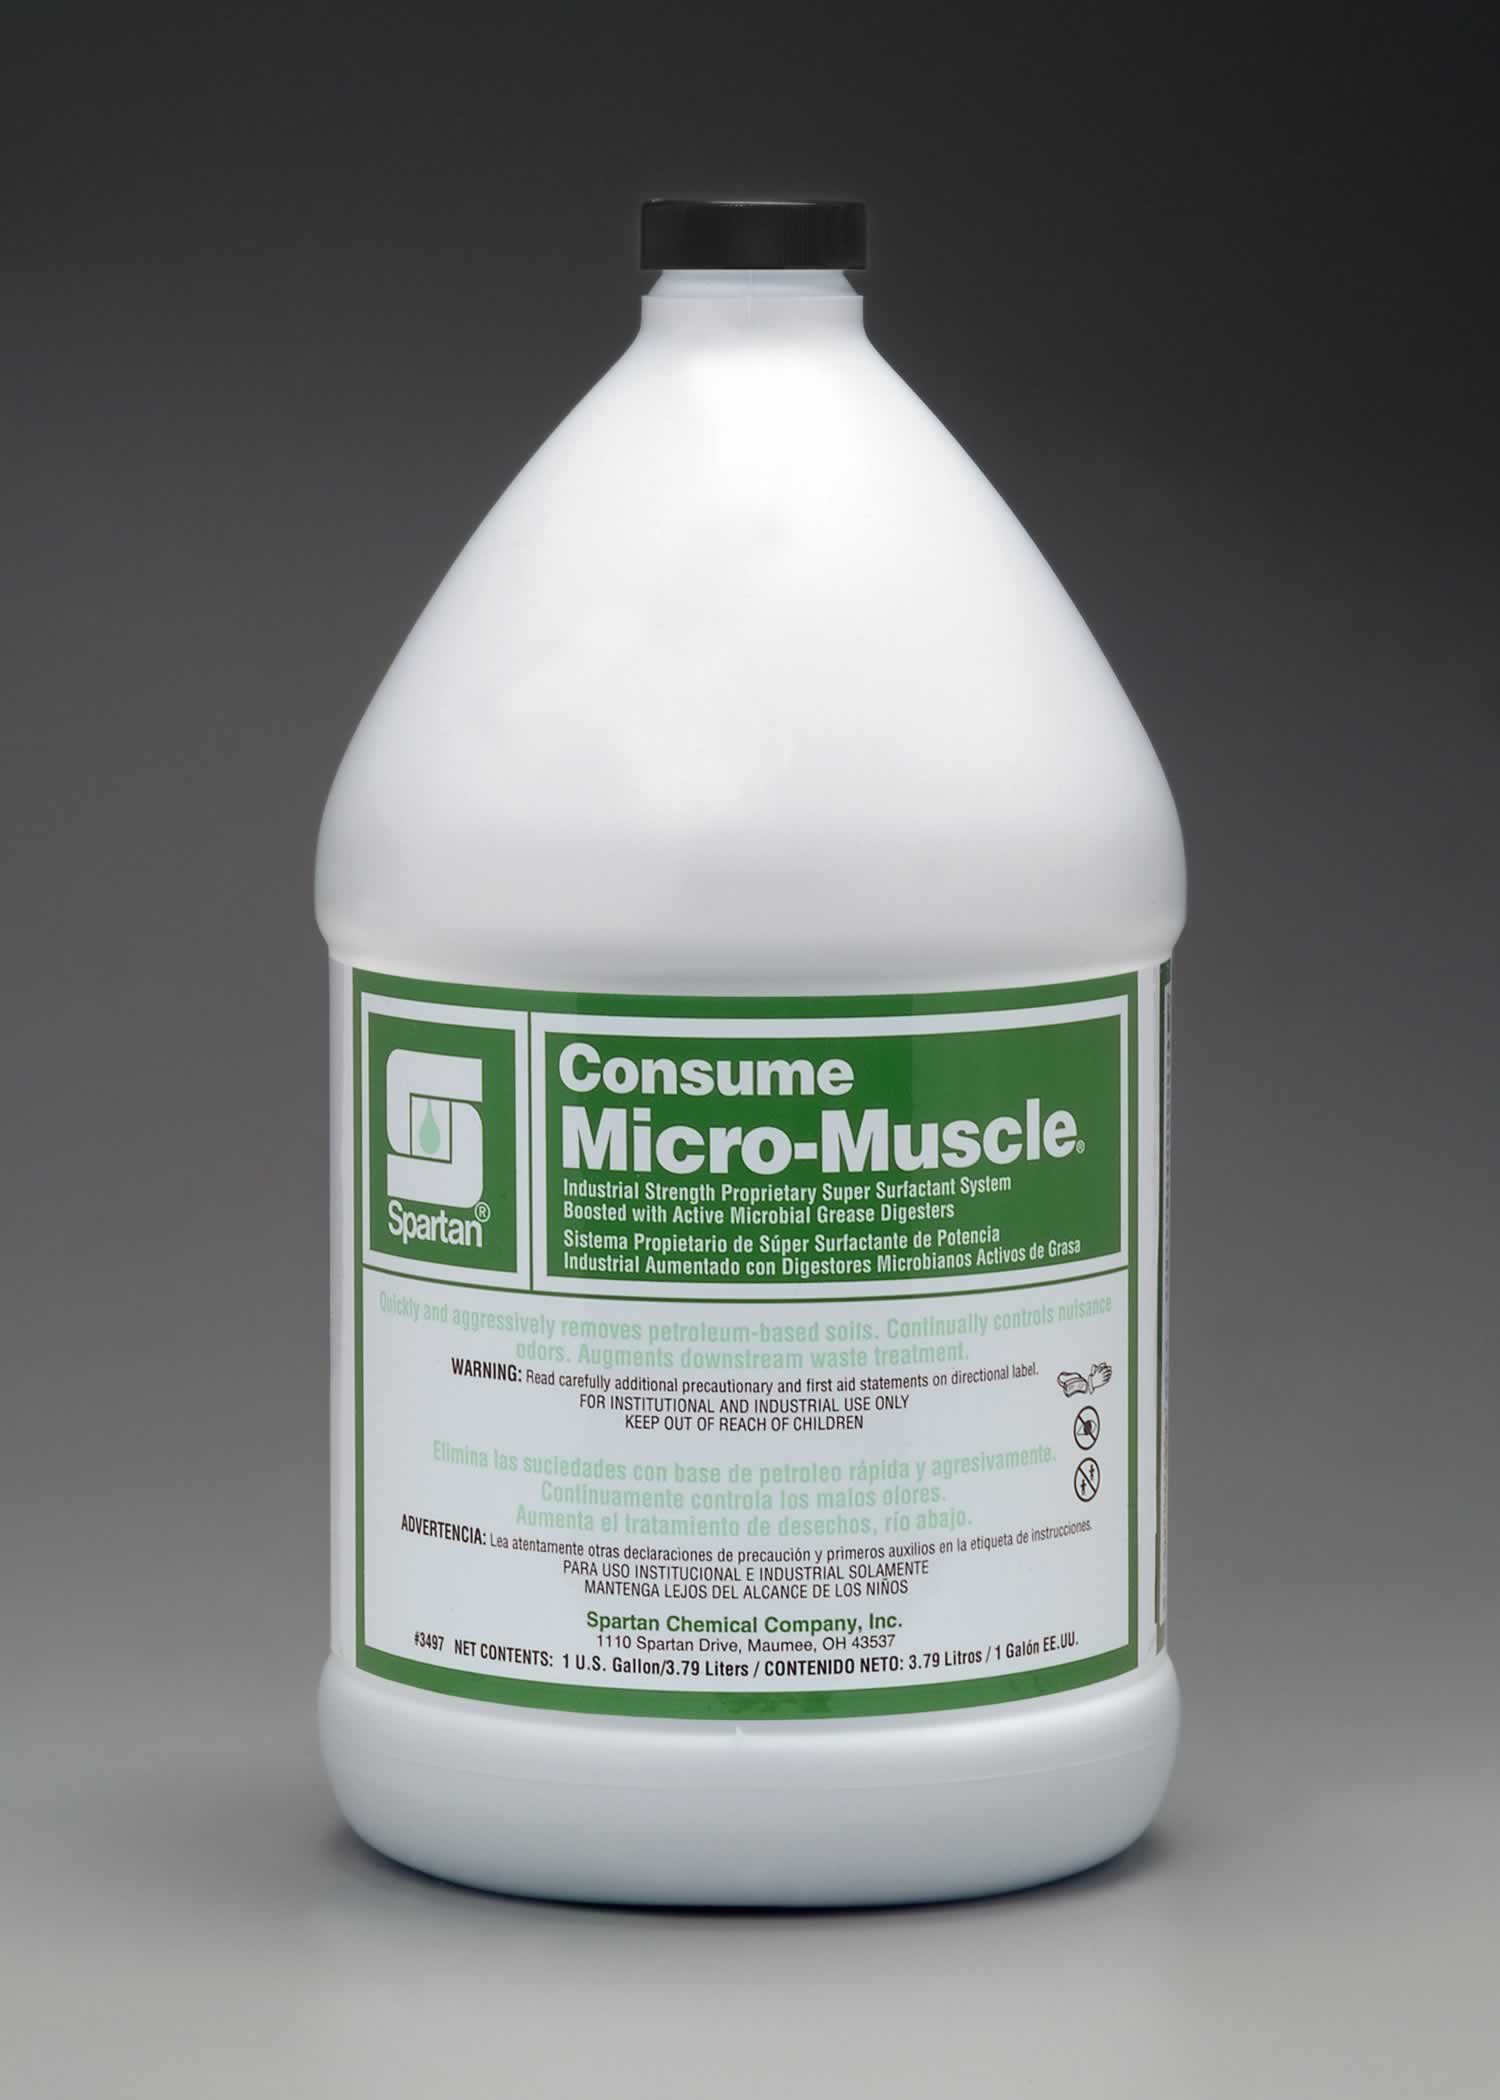 Consume Micro-Muscle industrial strength degreaser and green cleaning products